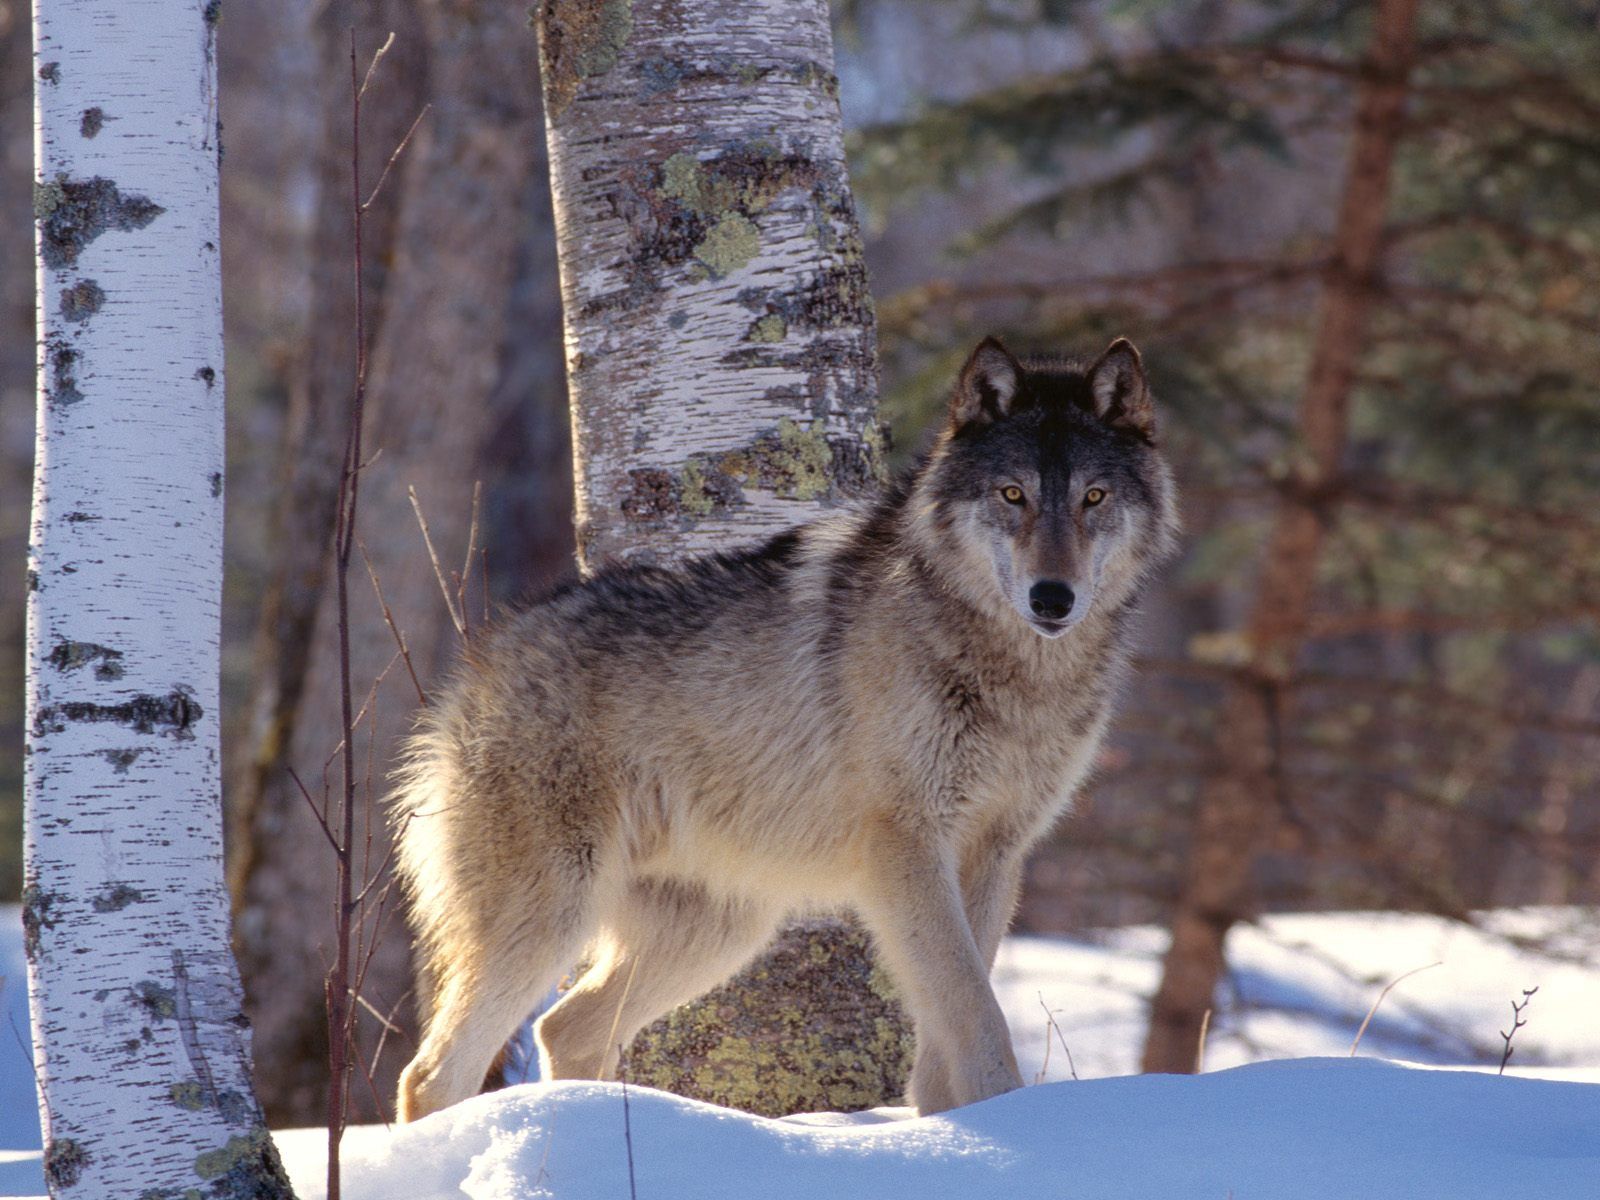 52718 download wallpaper wolf, animals, winter, snow, predator screensavers and pictures for free